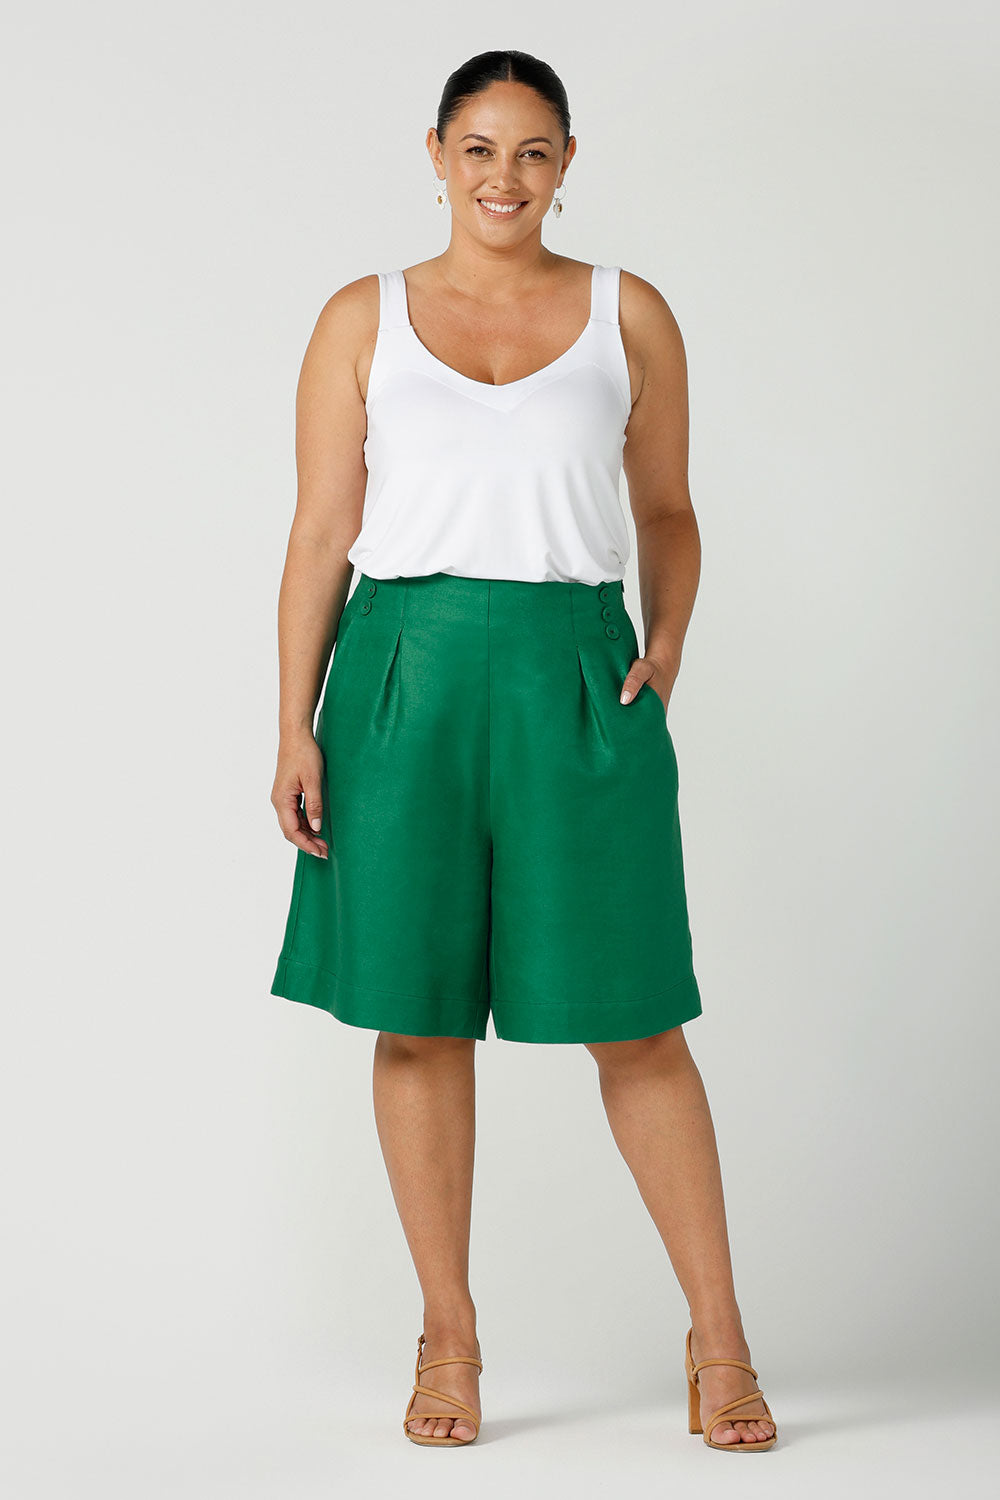 A size 12 woman wears 100% Linen Bermuda shorts. The perfect smart casual shorts suitable for summer workwear to take you through to the weekend. Beautiful emerald green colour and soft tailoring details. Designed and made in Australia for sizes 8 -24.